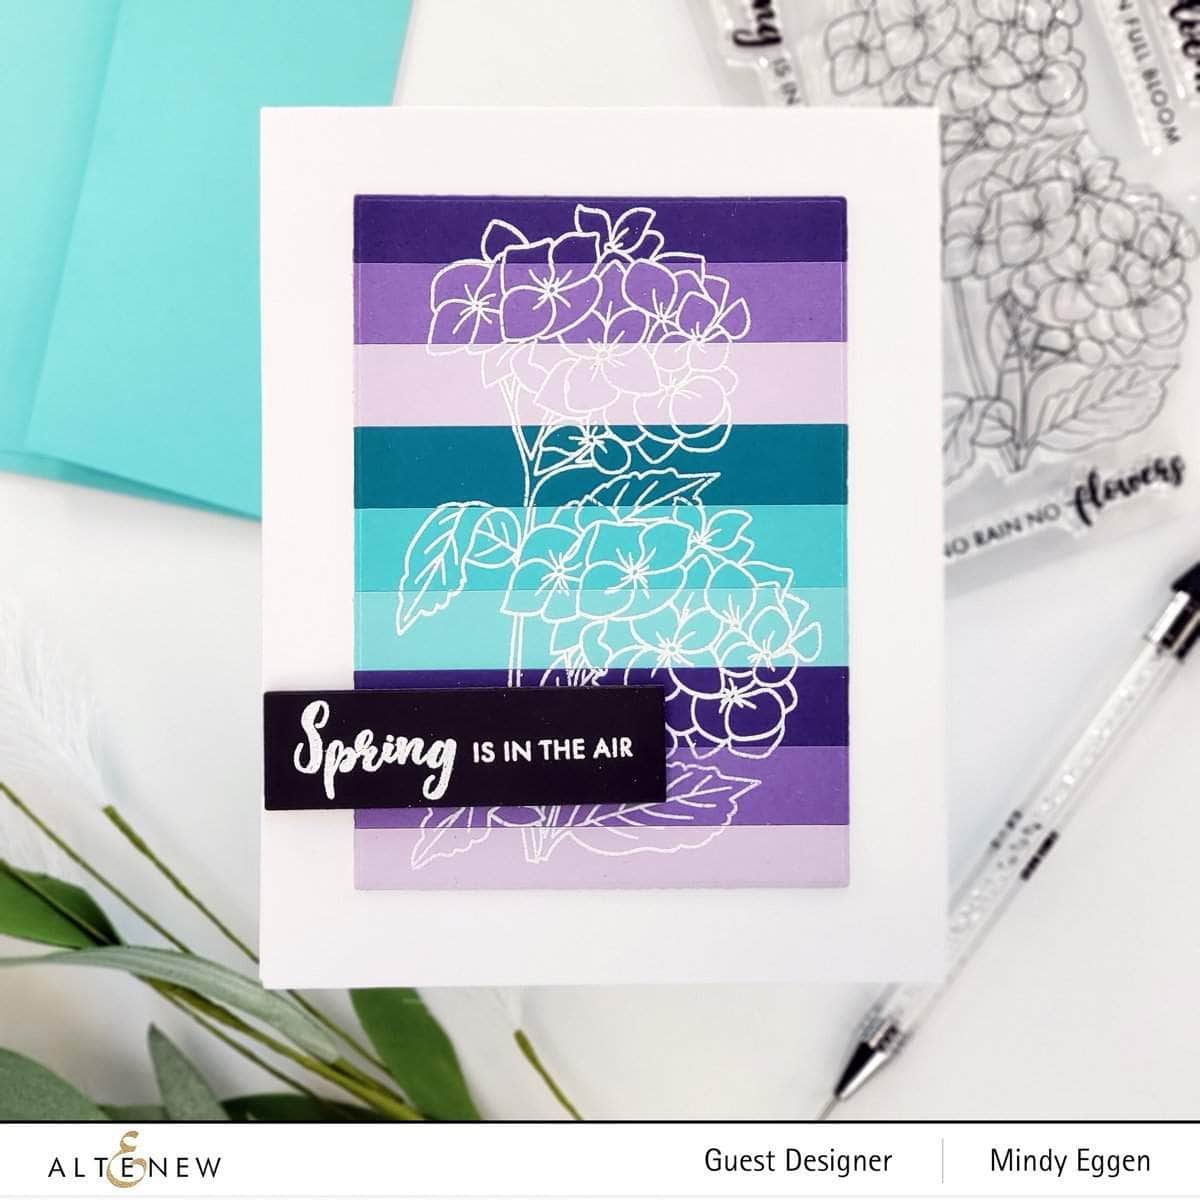 Photocentric Clear Stamps Paint-A-Flower: Hydrangea Outline Stamp Set